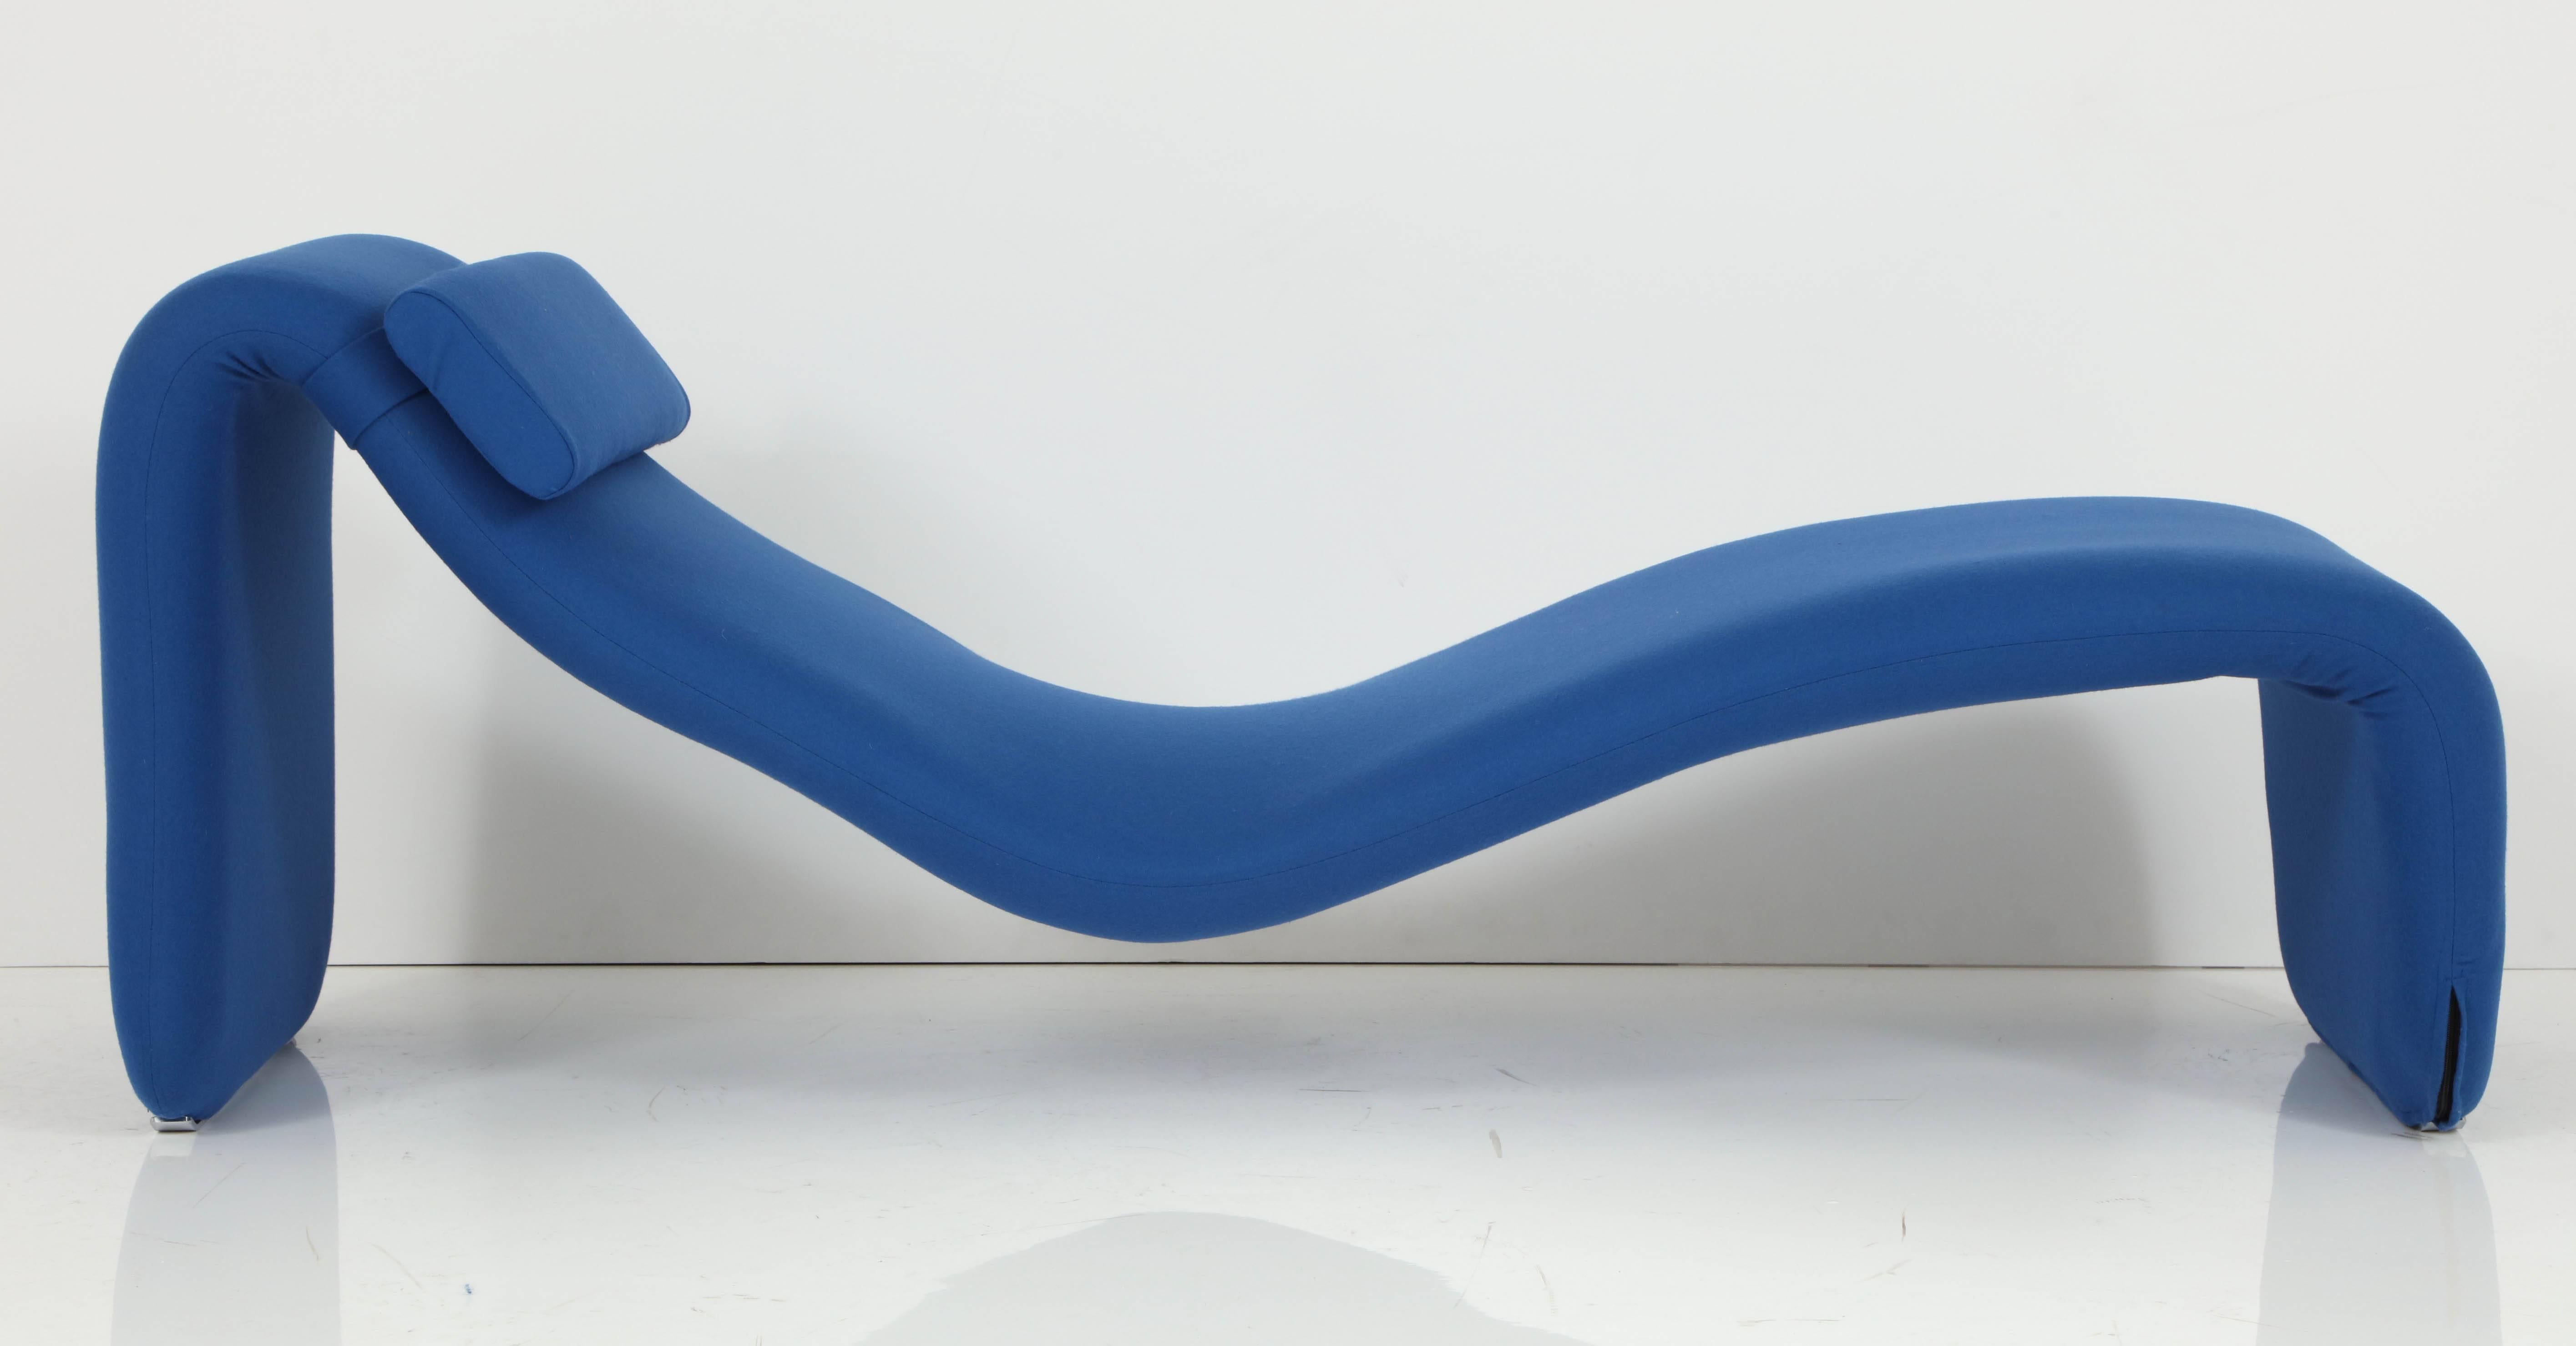 Djinn chaise longue reupholstered in blue wool. Designed by Olivier Mourgue for Airborne.